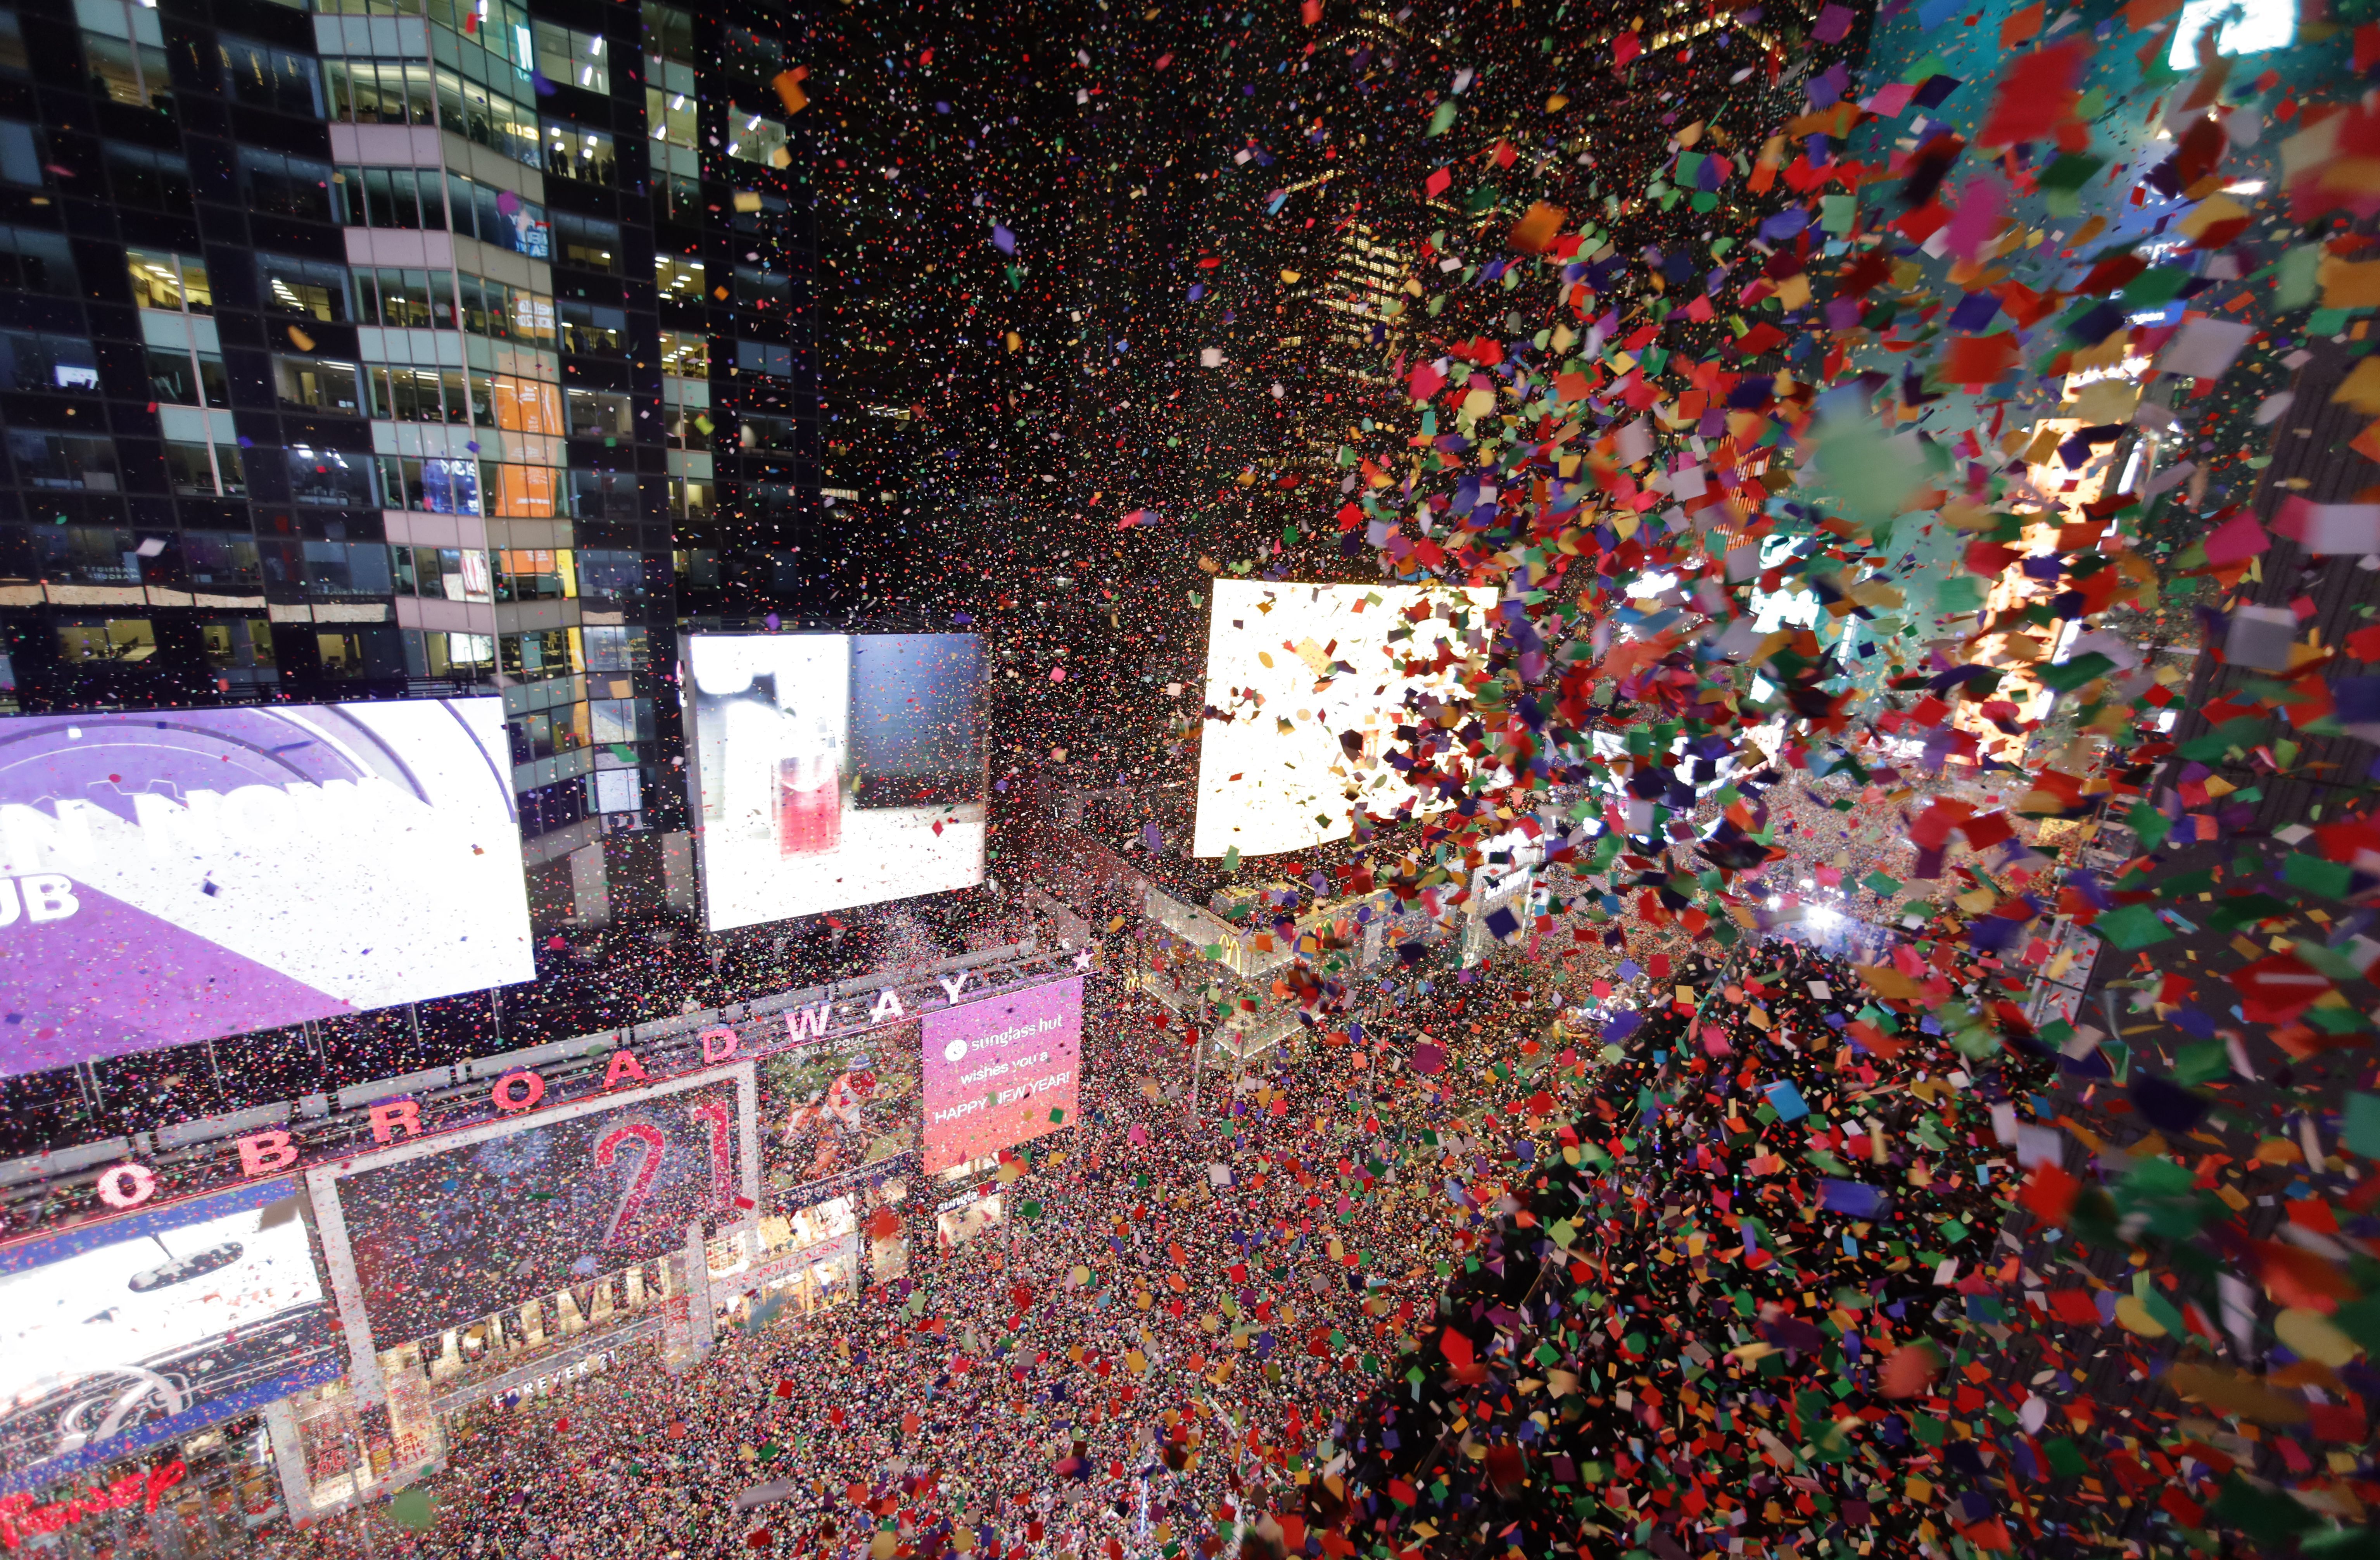 Confetti fills the air over top of revelers in New York City's Times Square.